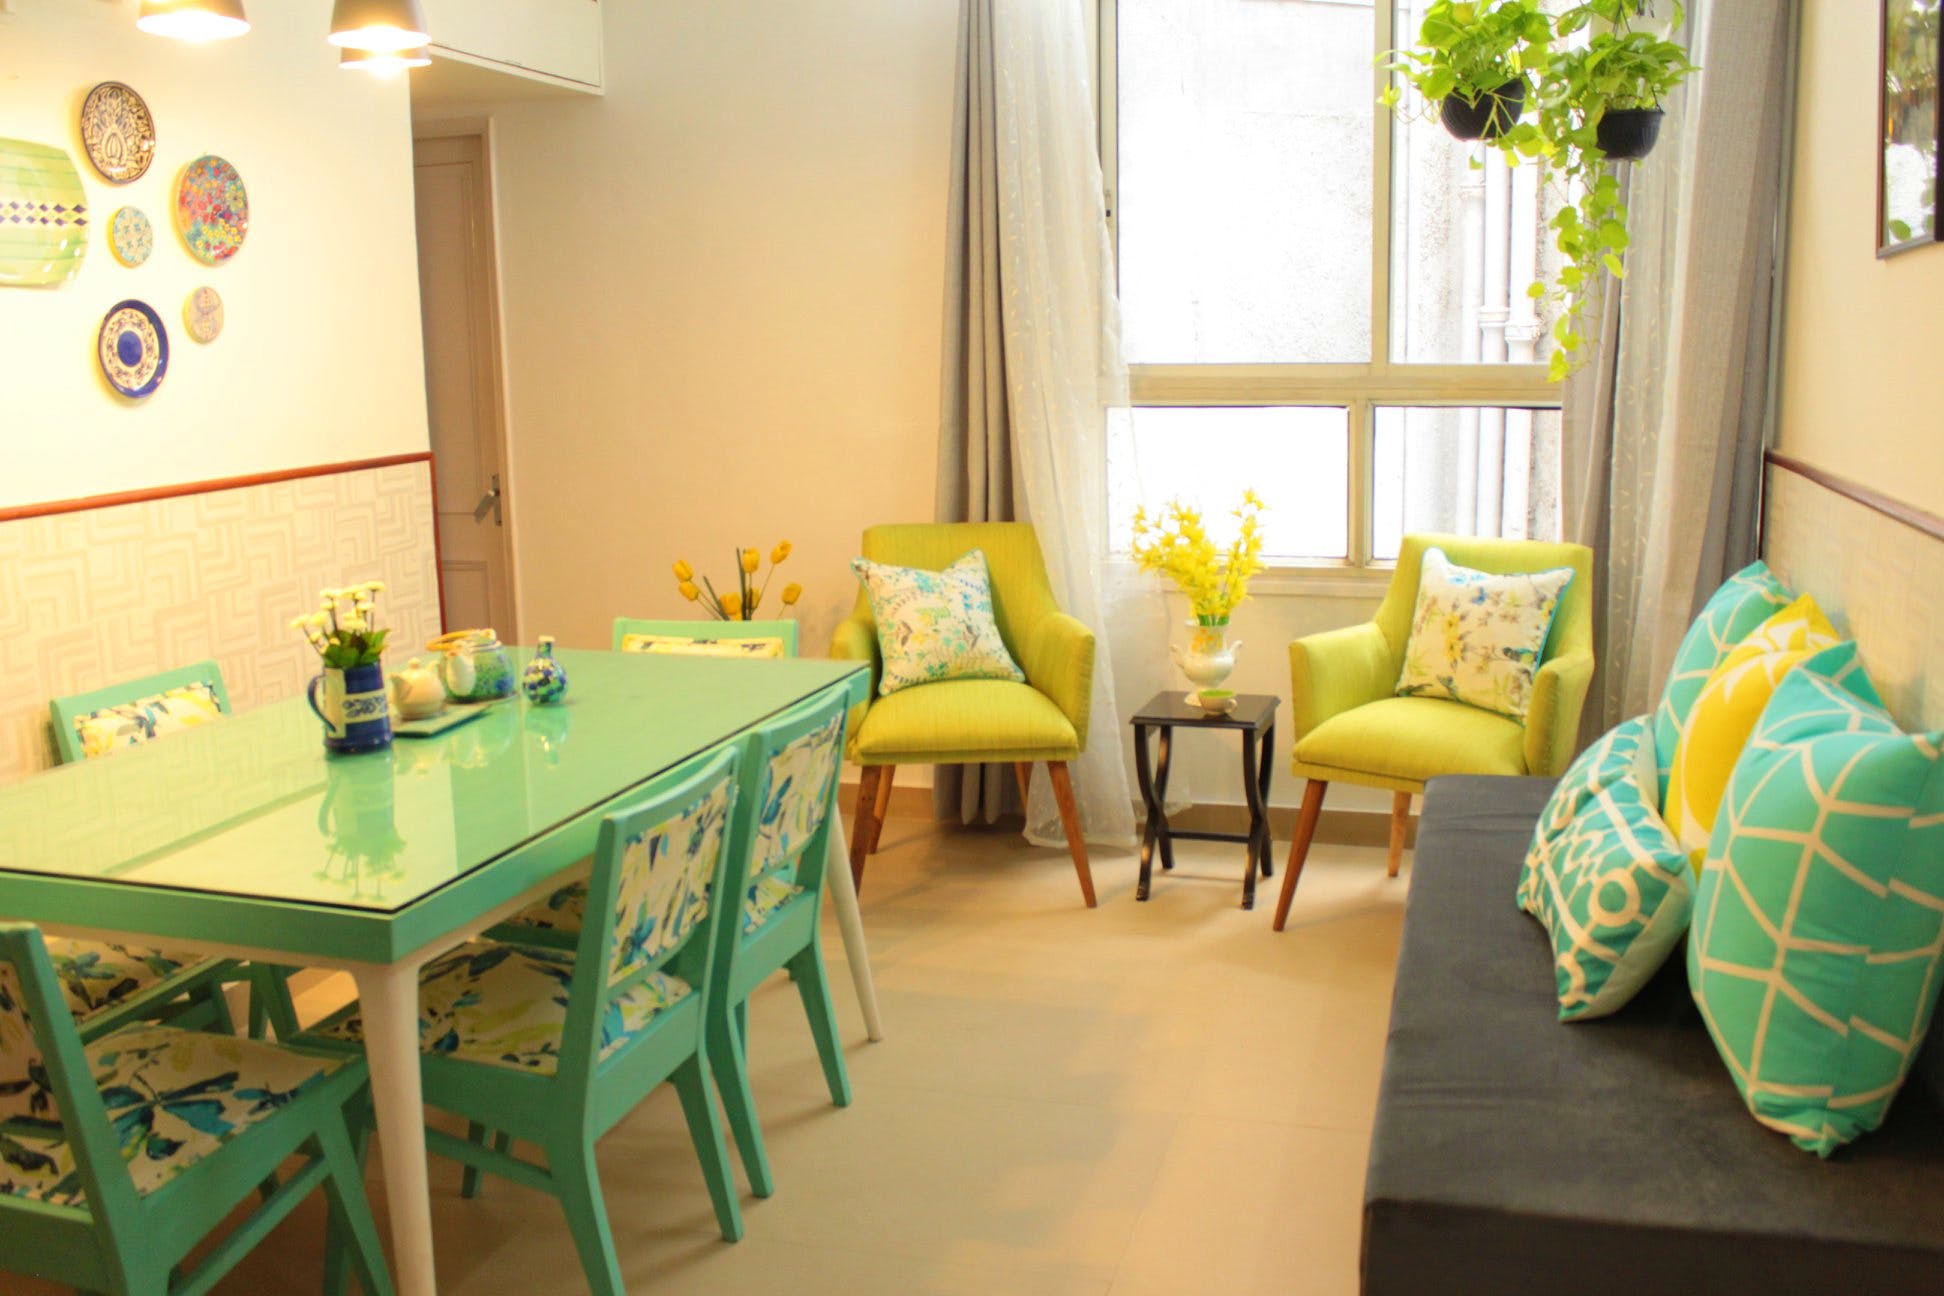 Room,Furniture,Green,Property,Interior design,Turquoise,Floor,Table,Yellow,Building